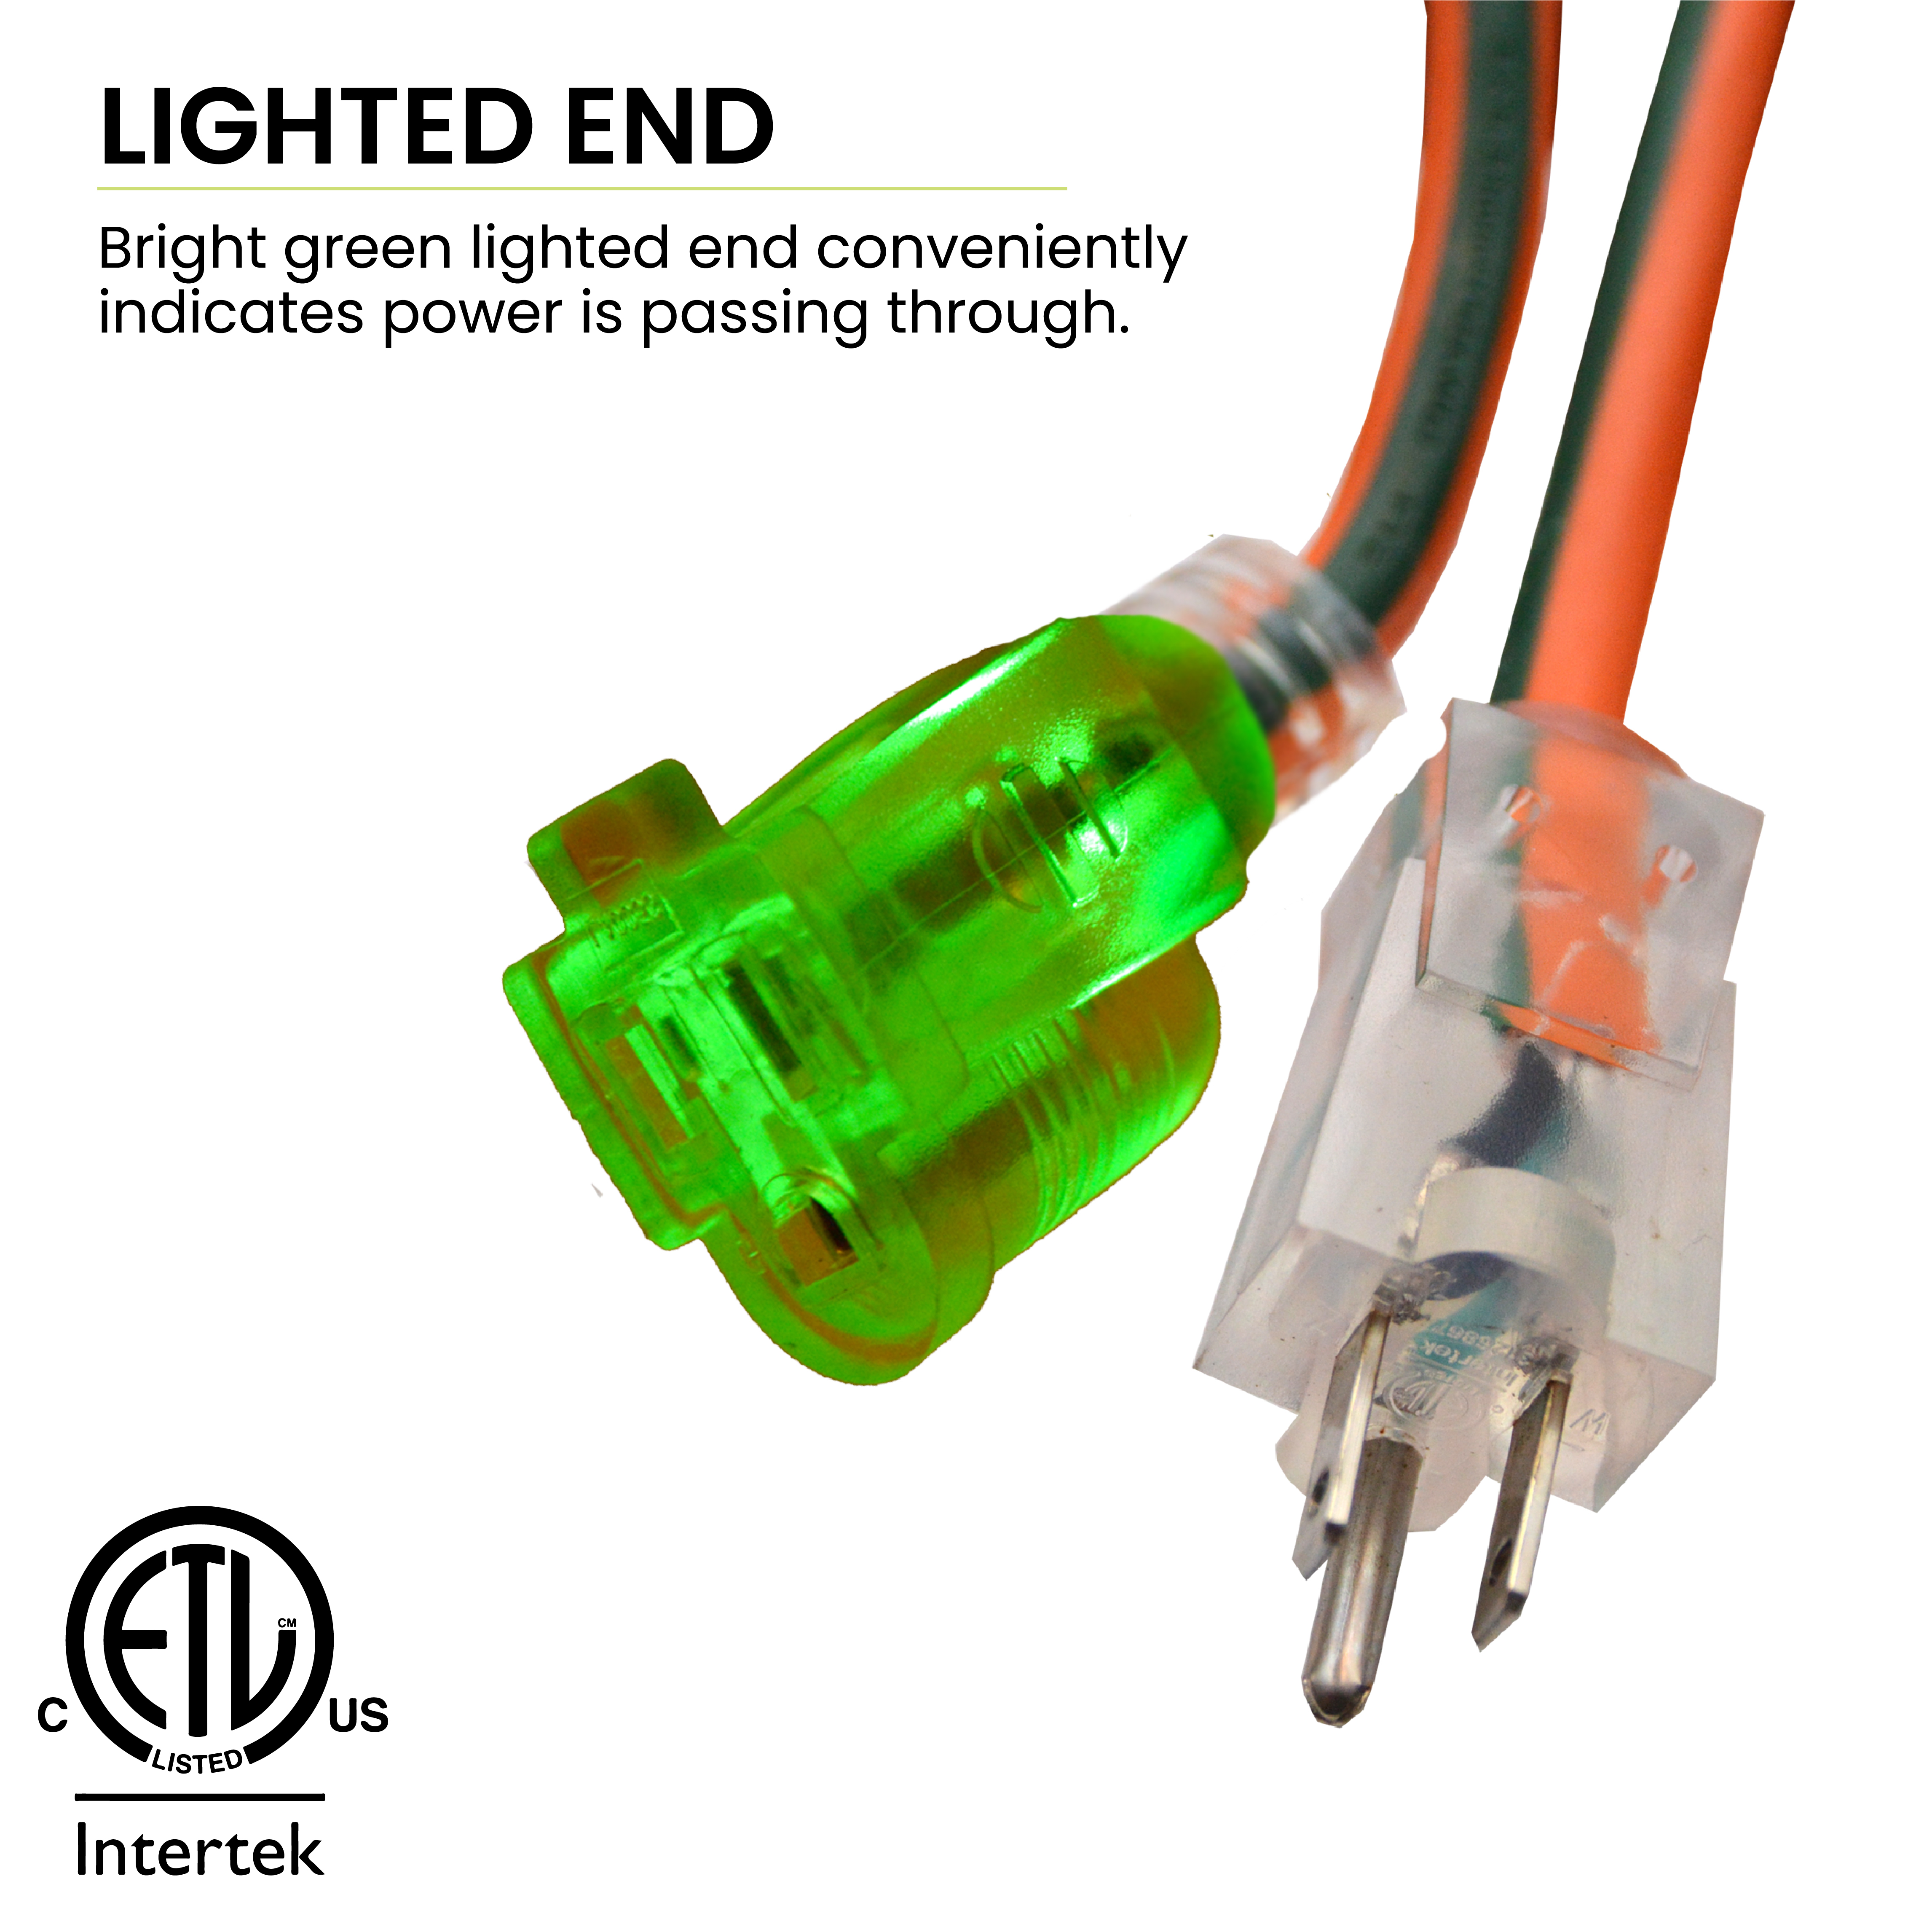 GoGreen Power (GG-14025) 12/3 25’ SJTW Outdoor Extension Cord, Lighted End, 25 Ft - image 4 of 6